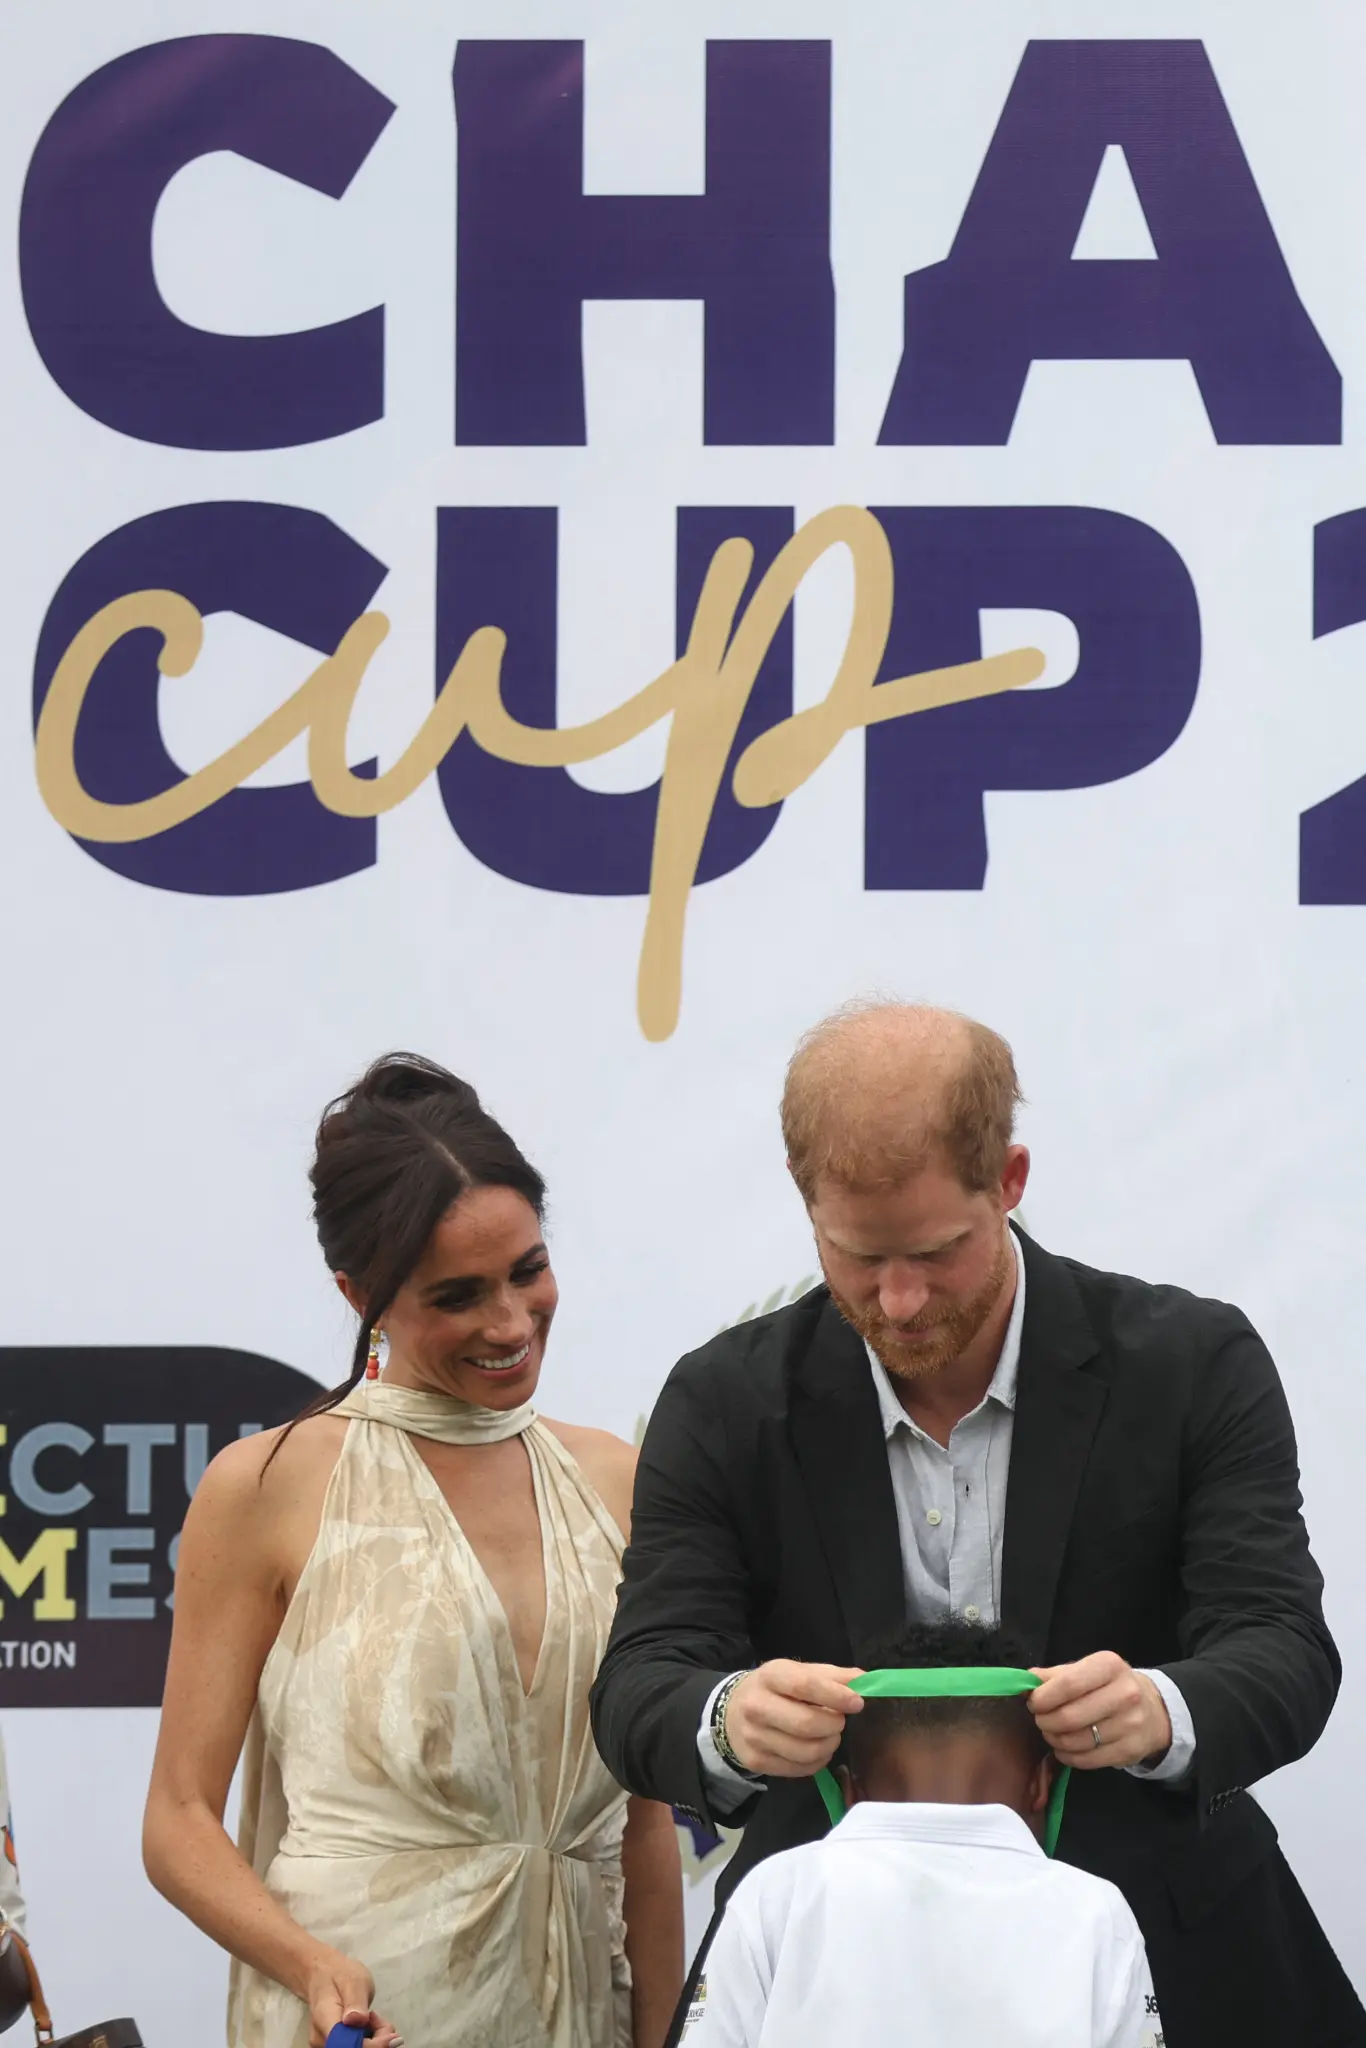 Meghan Markle Stuns in Chic $1,995 Dress at Lagos Polo Event—See the Look That's Breaking the Internet!